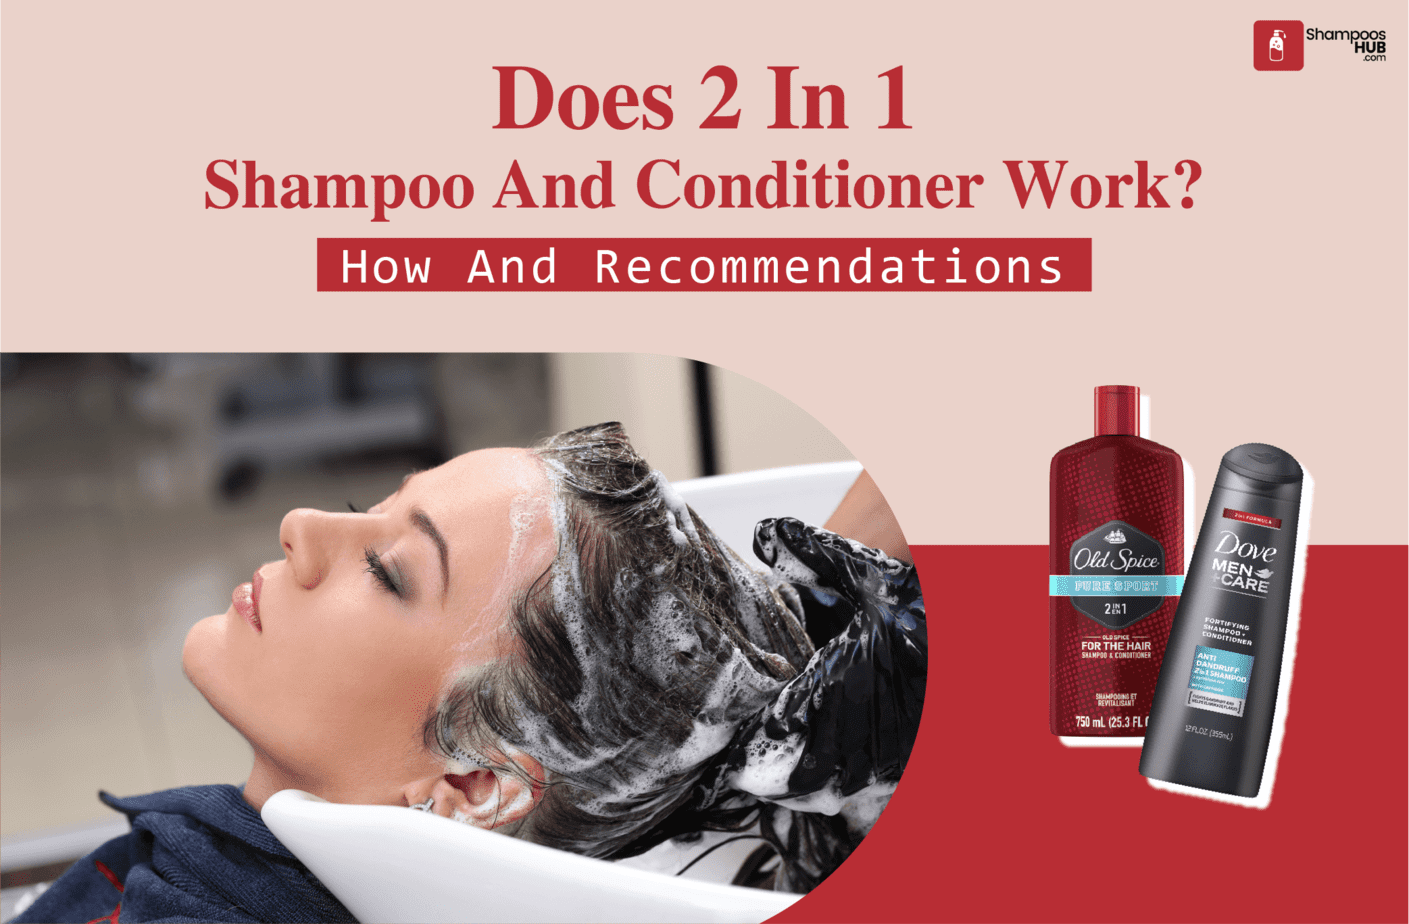 Does 2 In 1 Shampoo And Conditioner Work?